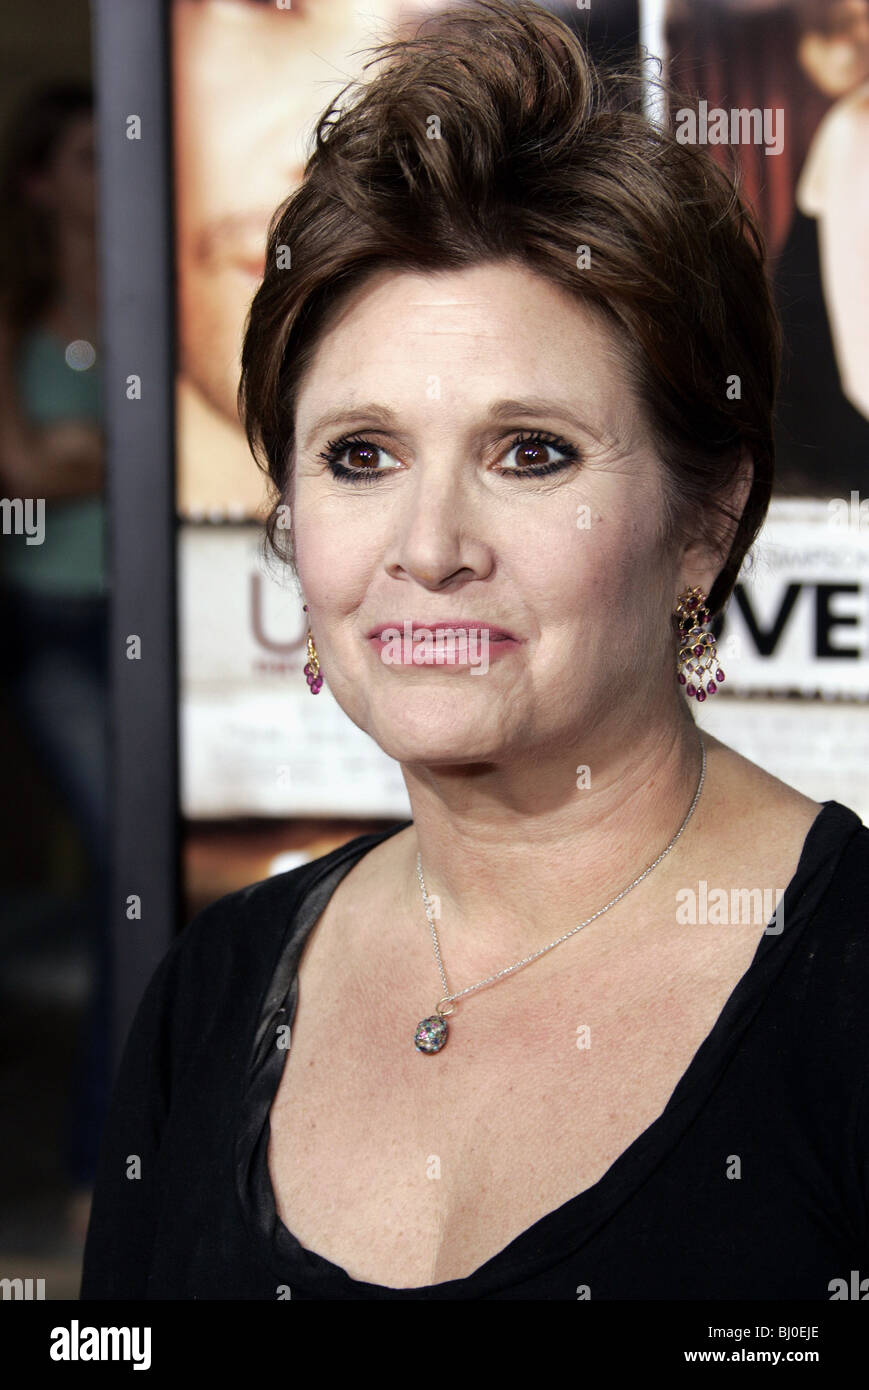 CARRIE FISHER ATTRICE Egyptian Theatre Hollywood LA USA 23/08/2005 Foto Stock